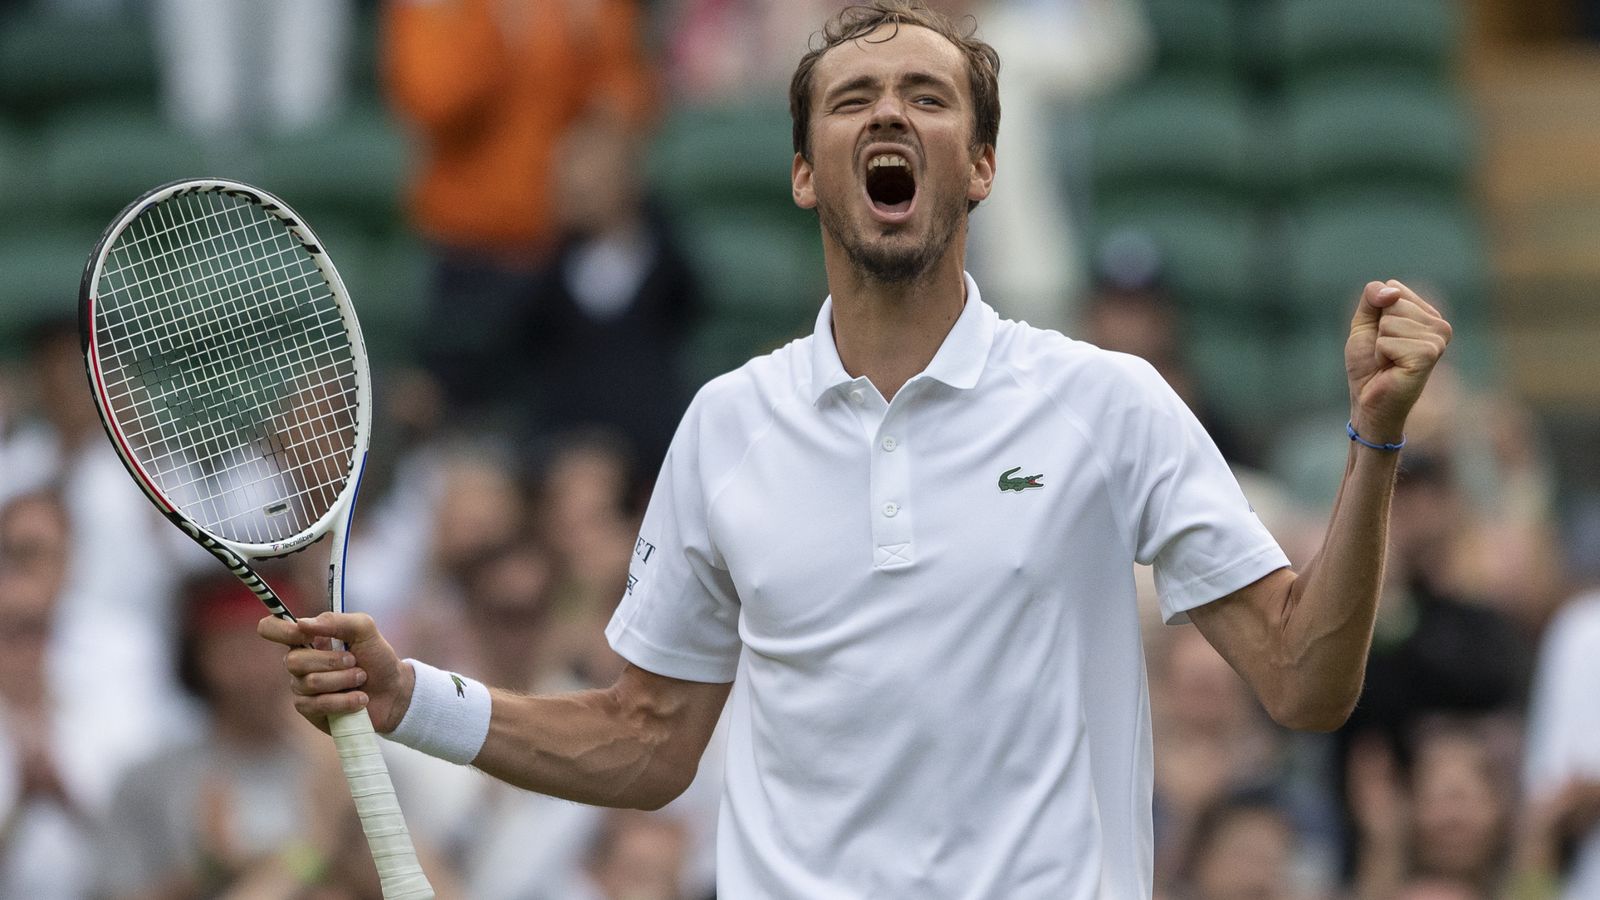 Wimbledon has its ranking points stripped by ATP and | Tennis News | Sky Sports